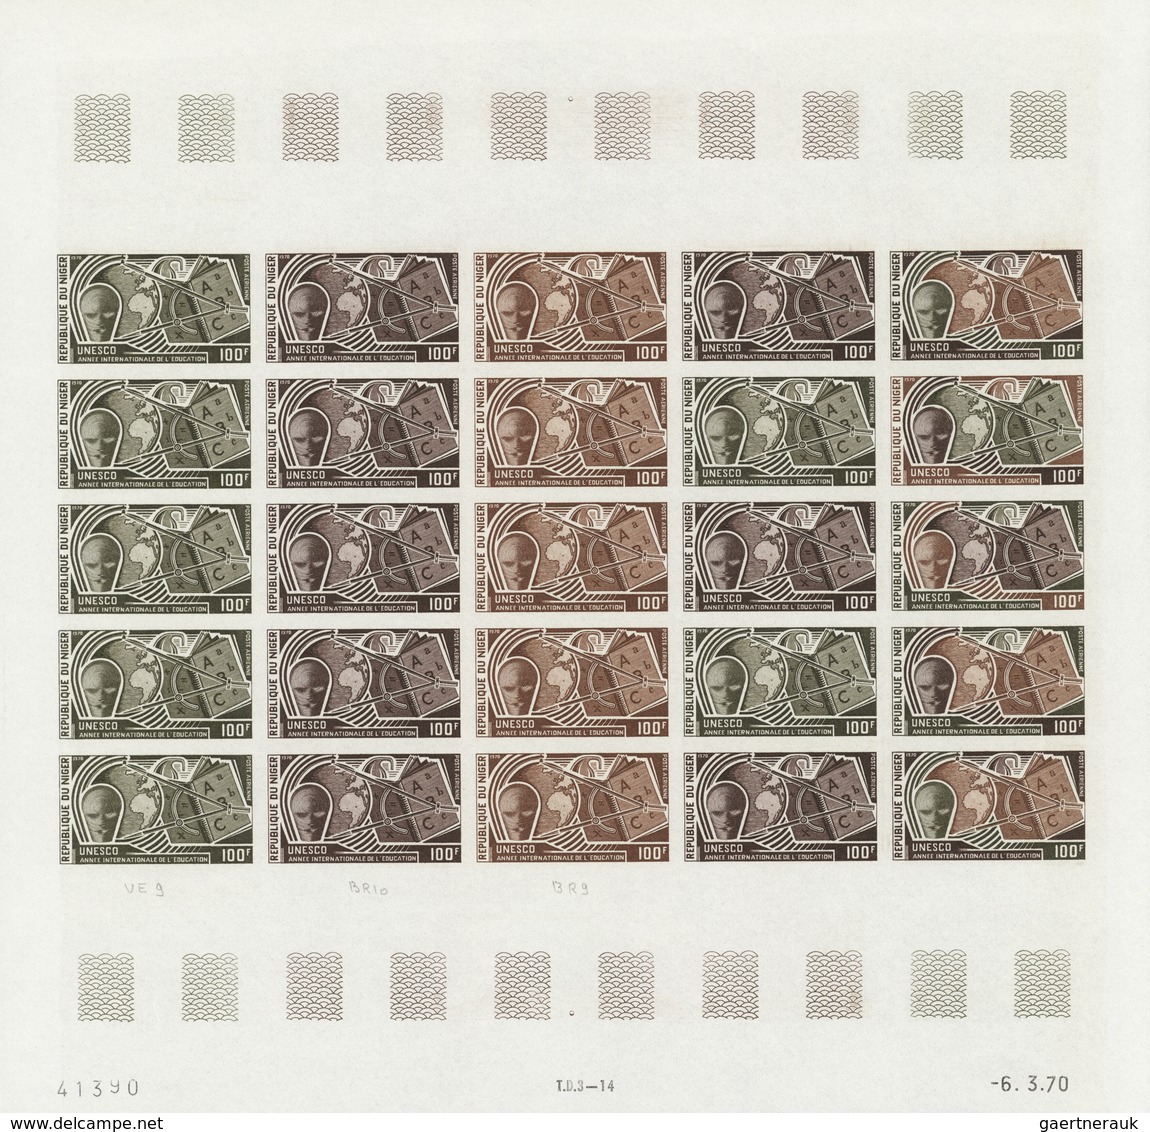 Niger: 1969/1978, IMPERFORATE COLOUR PROOFS, MNH collection of 105 complete sheets (=2.245 proofs),